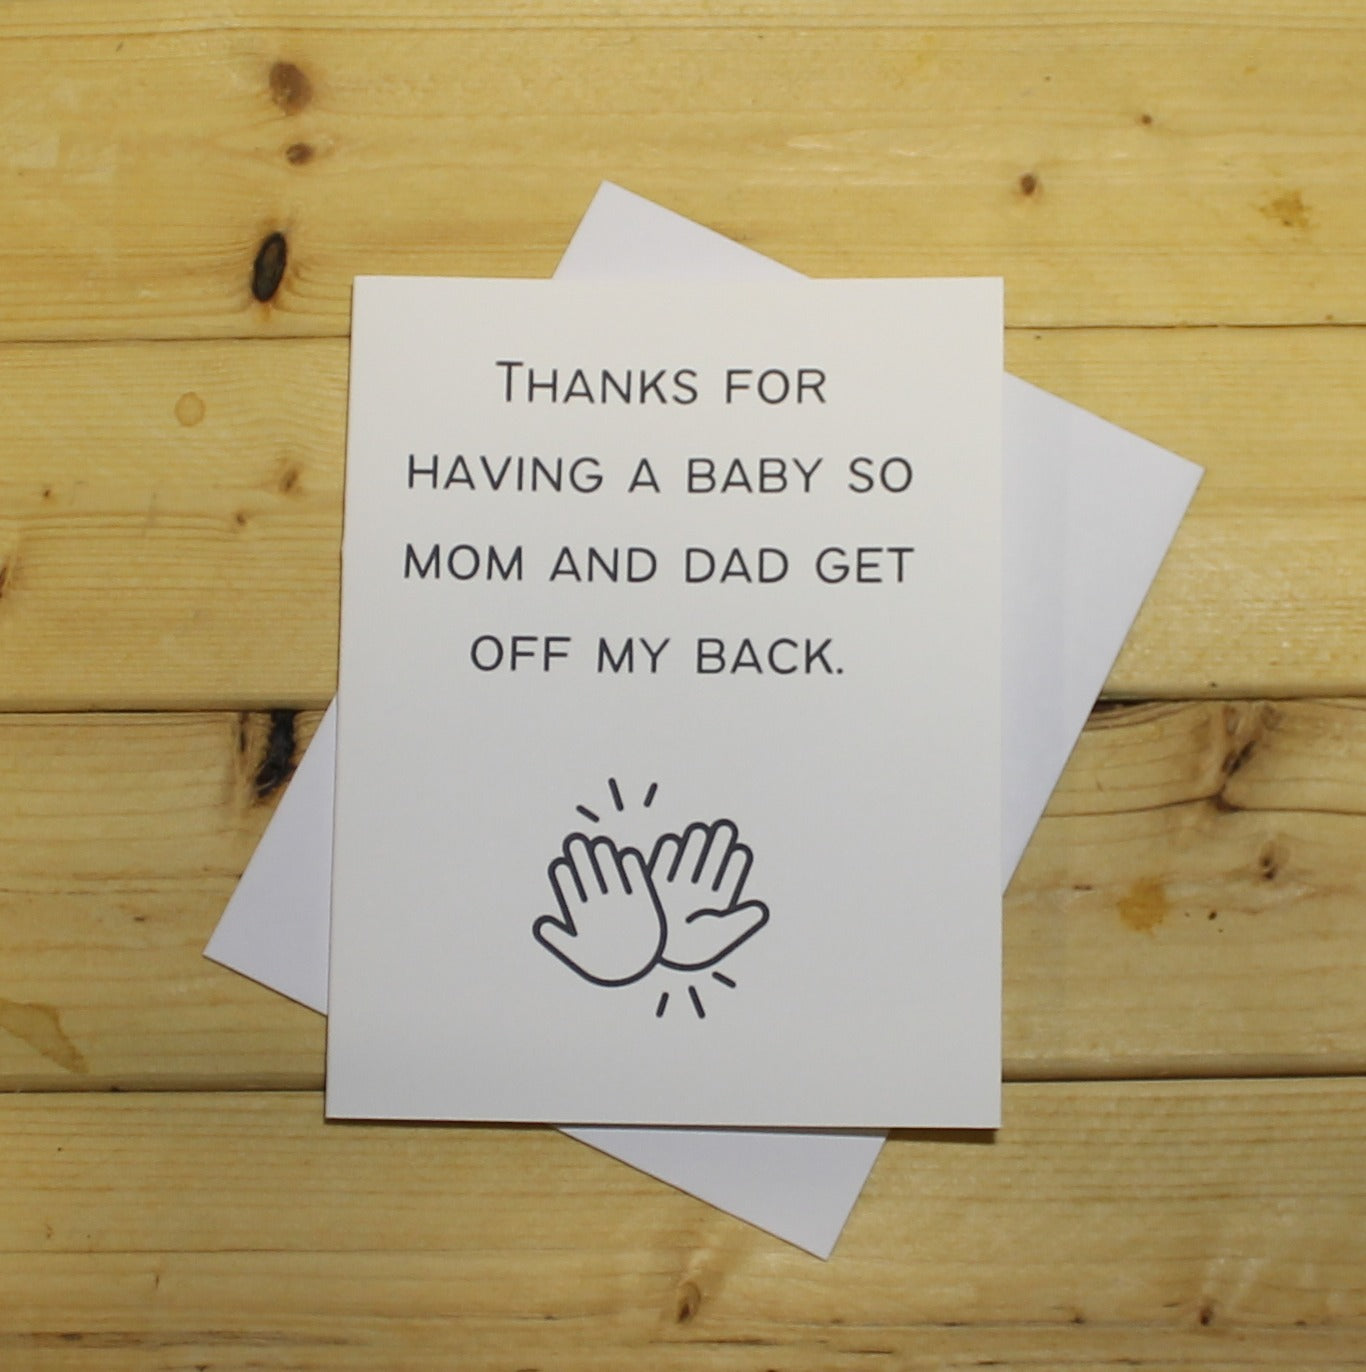 Funny Baby Card: "Thanks for having a baby so mom and dad get off my back."